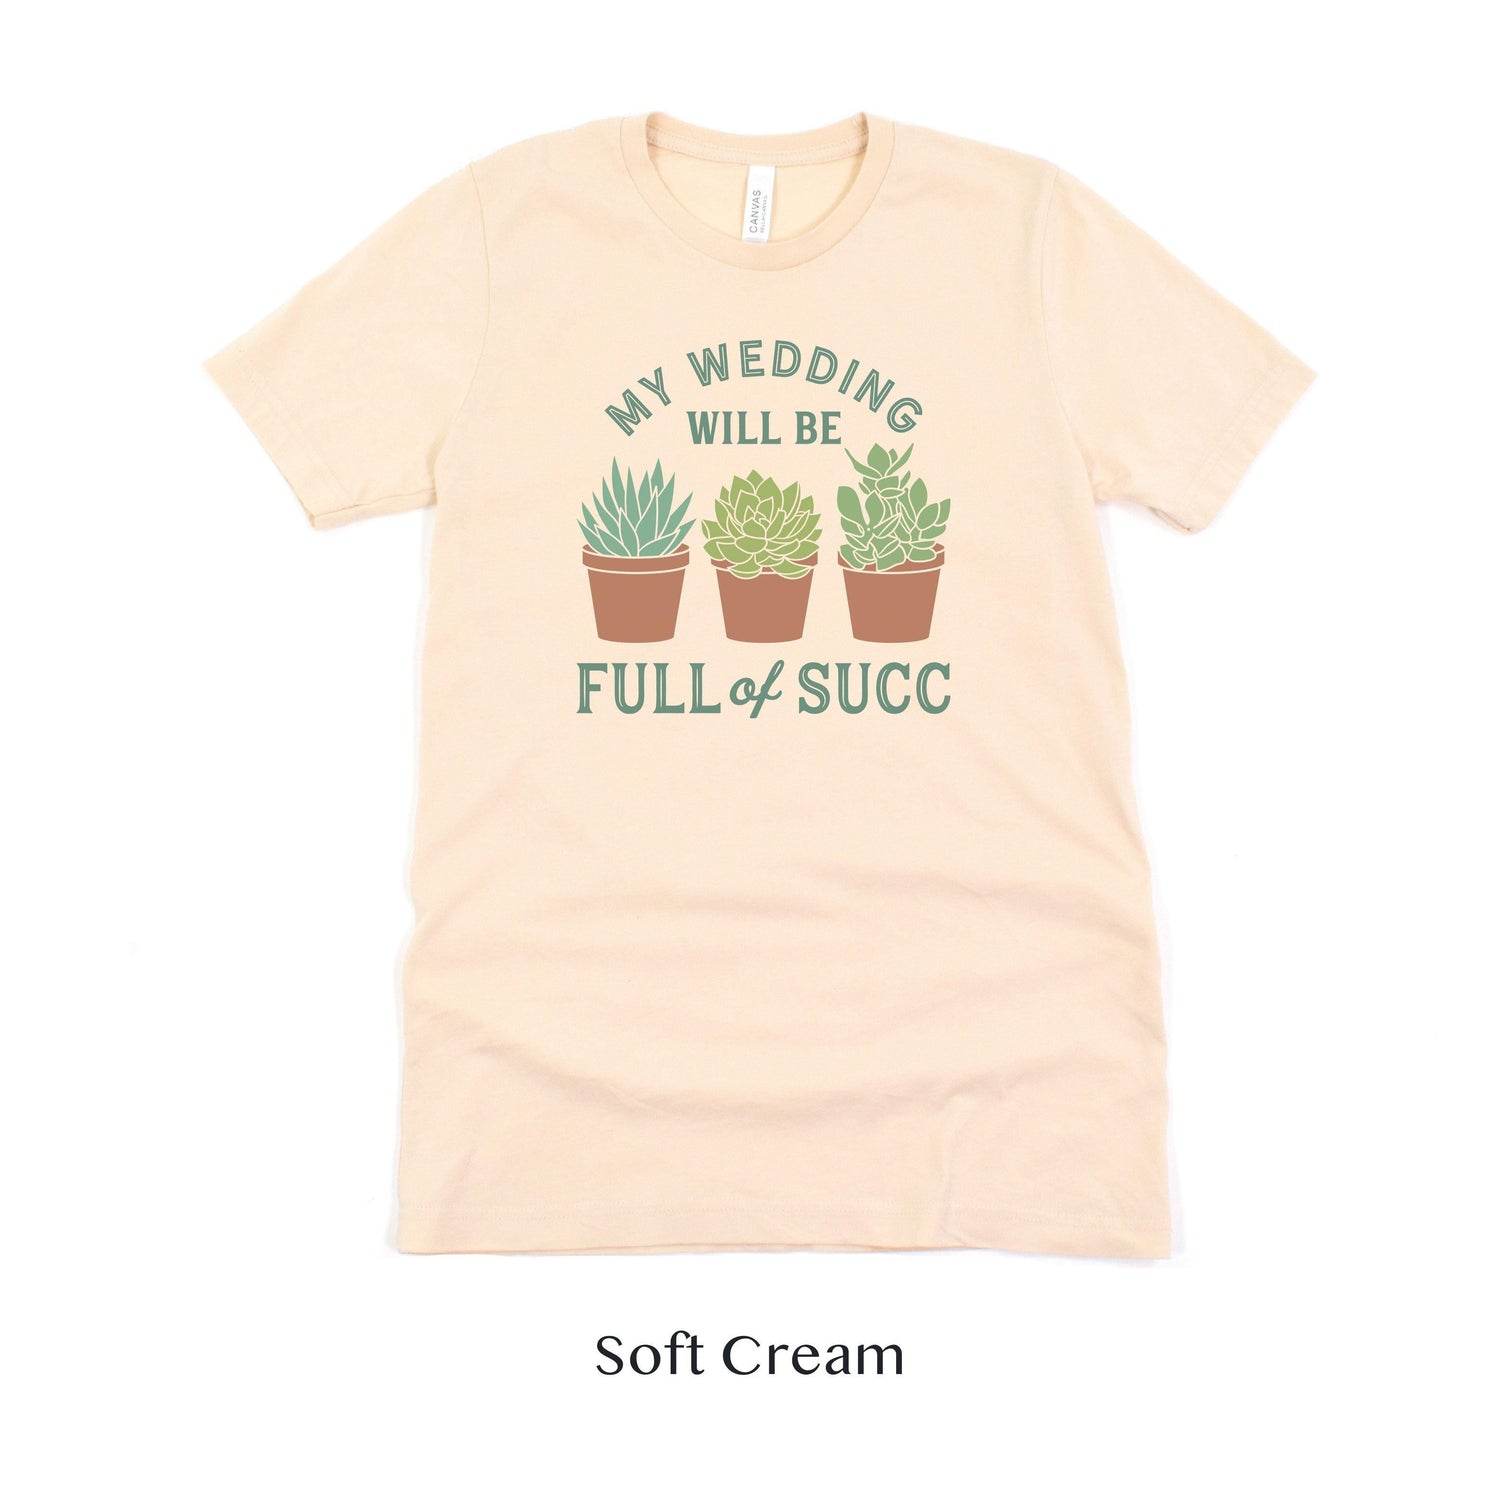 My Wedding will Succ - Succulent Wedding Short-Sleeve Tee - Plus Sizes Available! by Oaklynn Lane